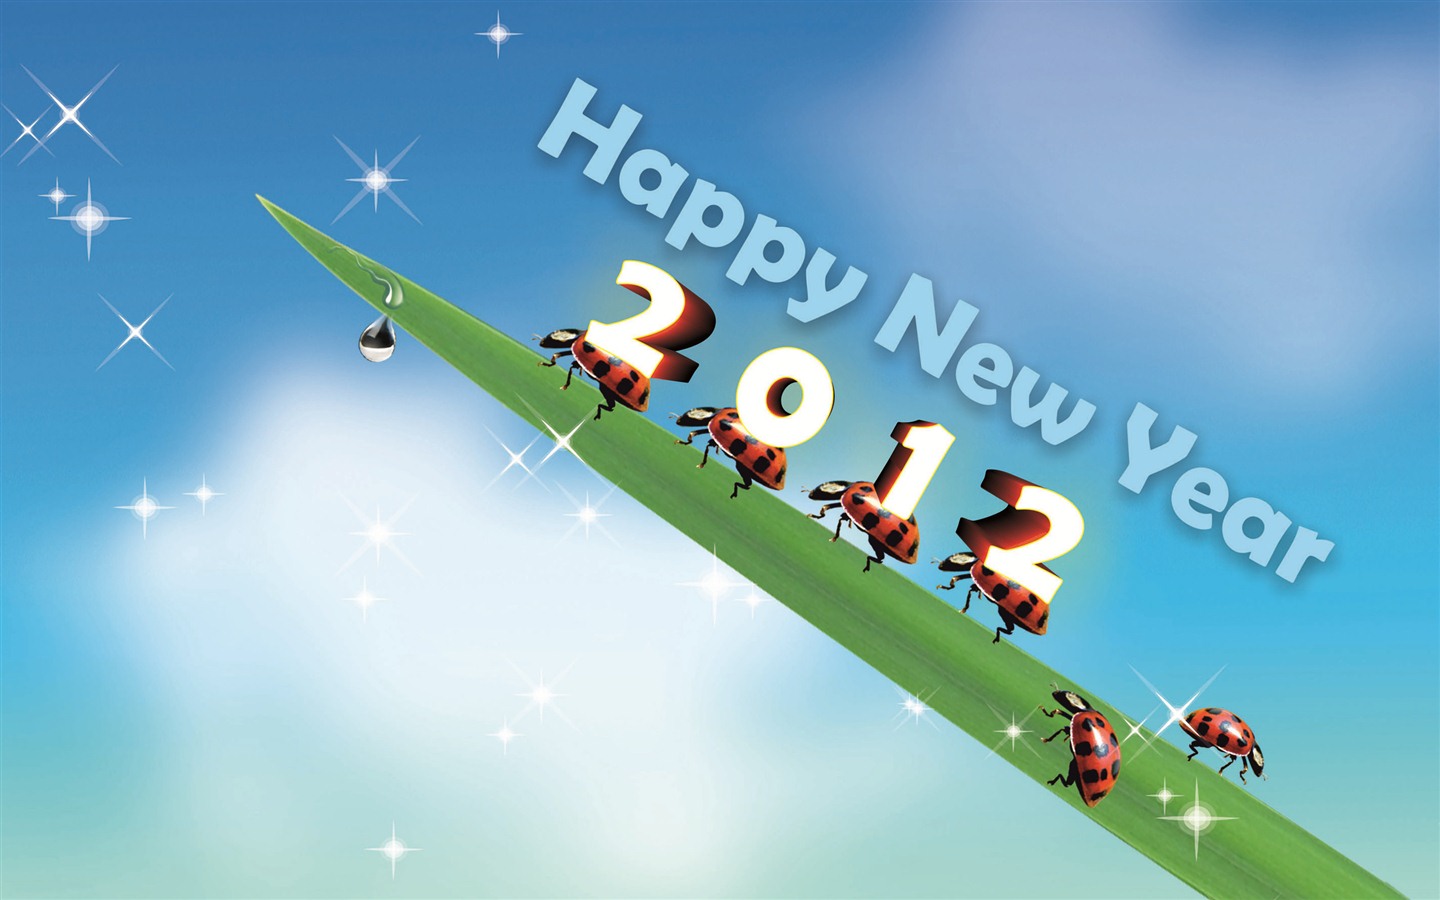 2012 New Year wallpapers (2) #8 - 1440x900